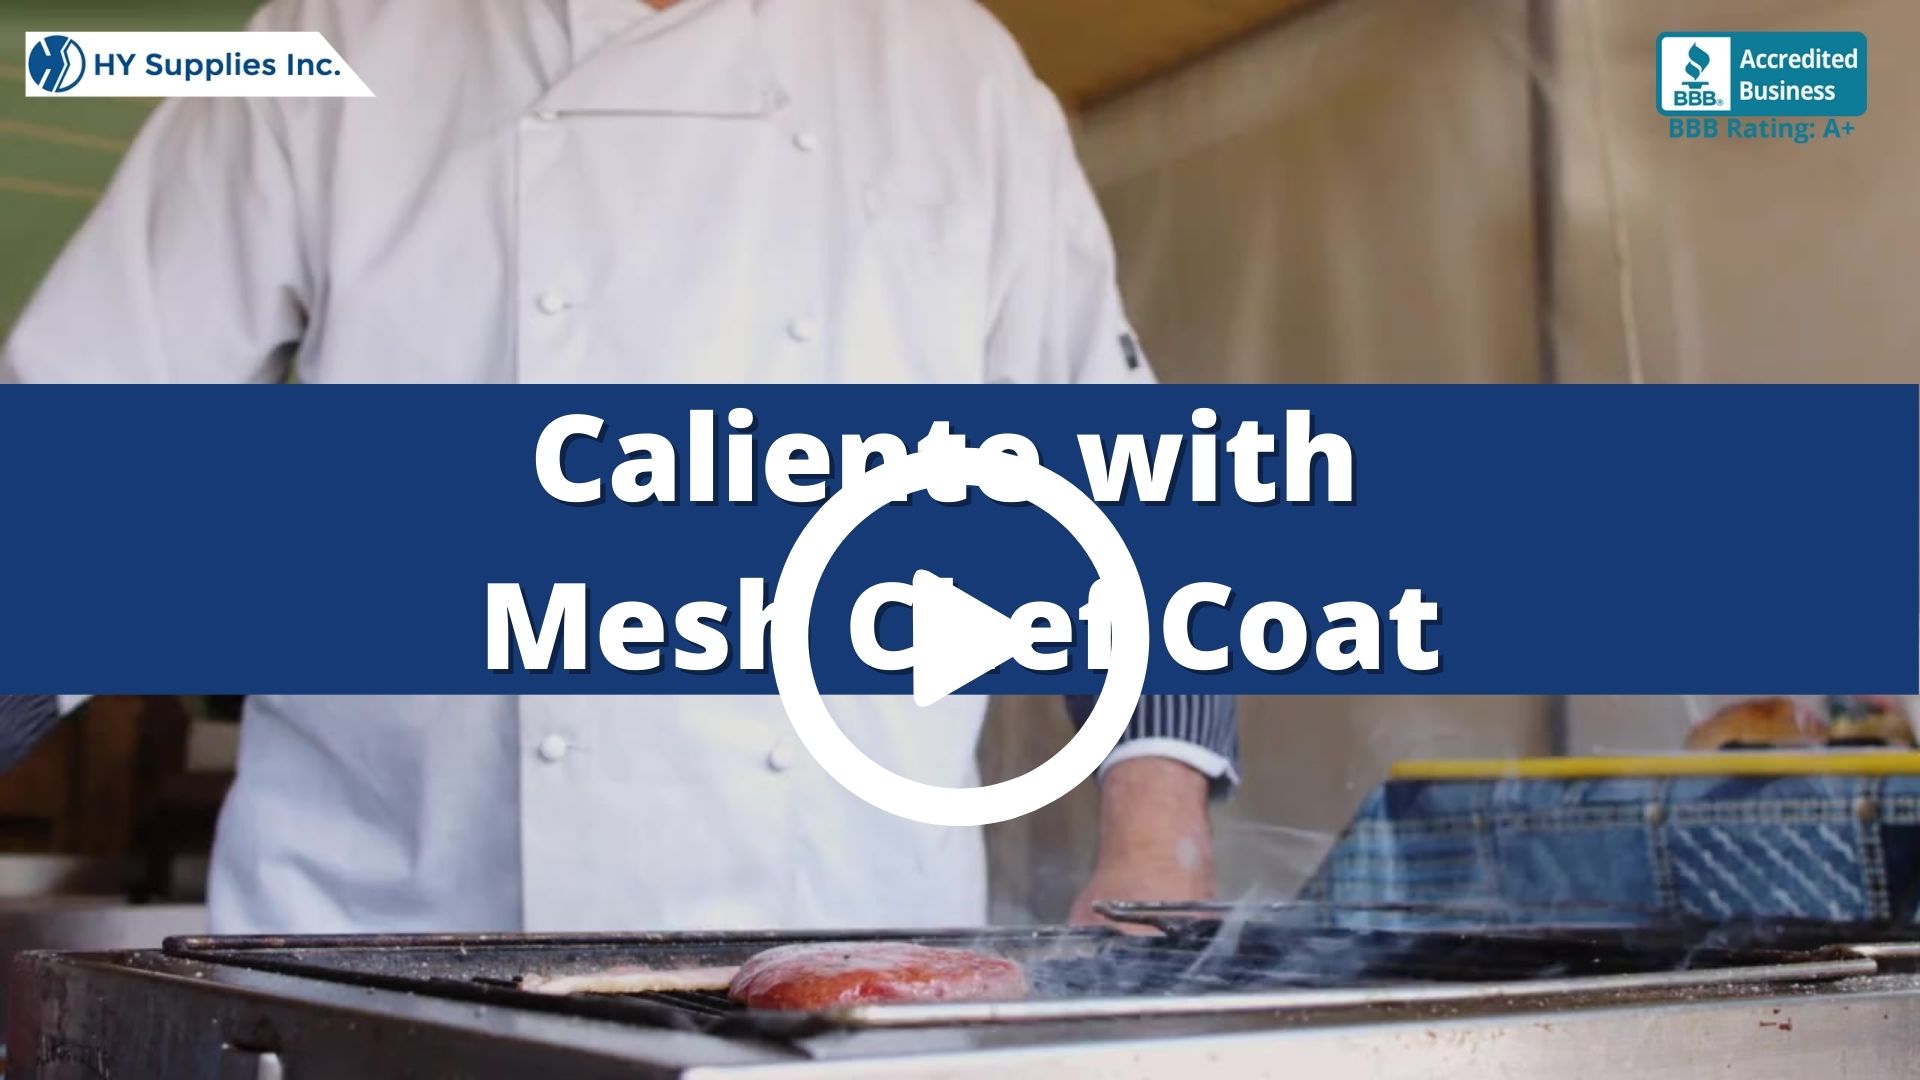 Caliente with Mesh Chef Coat